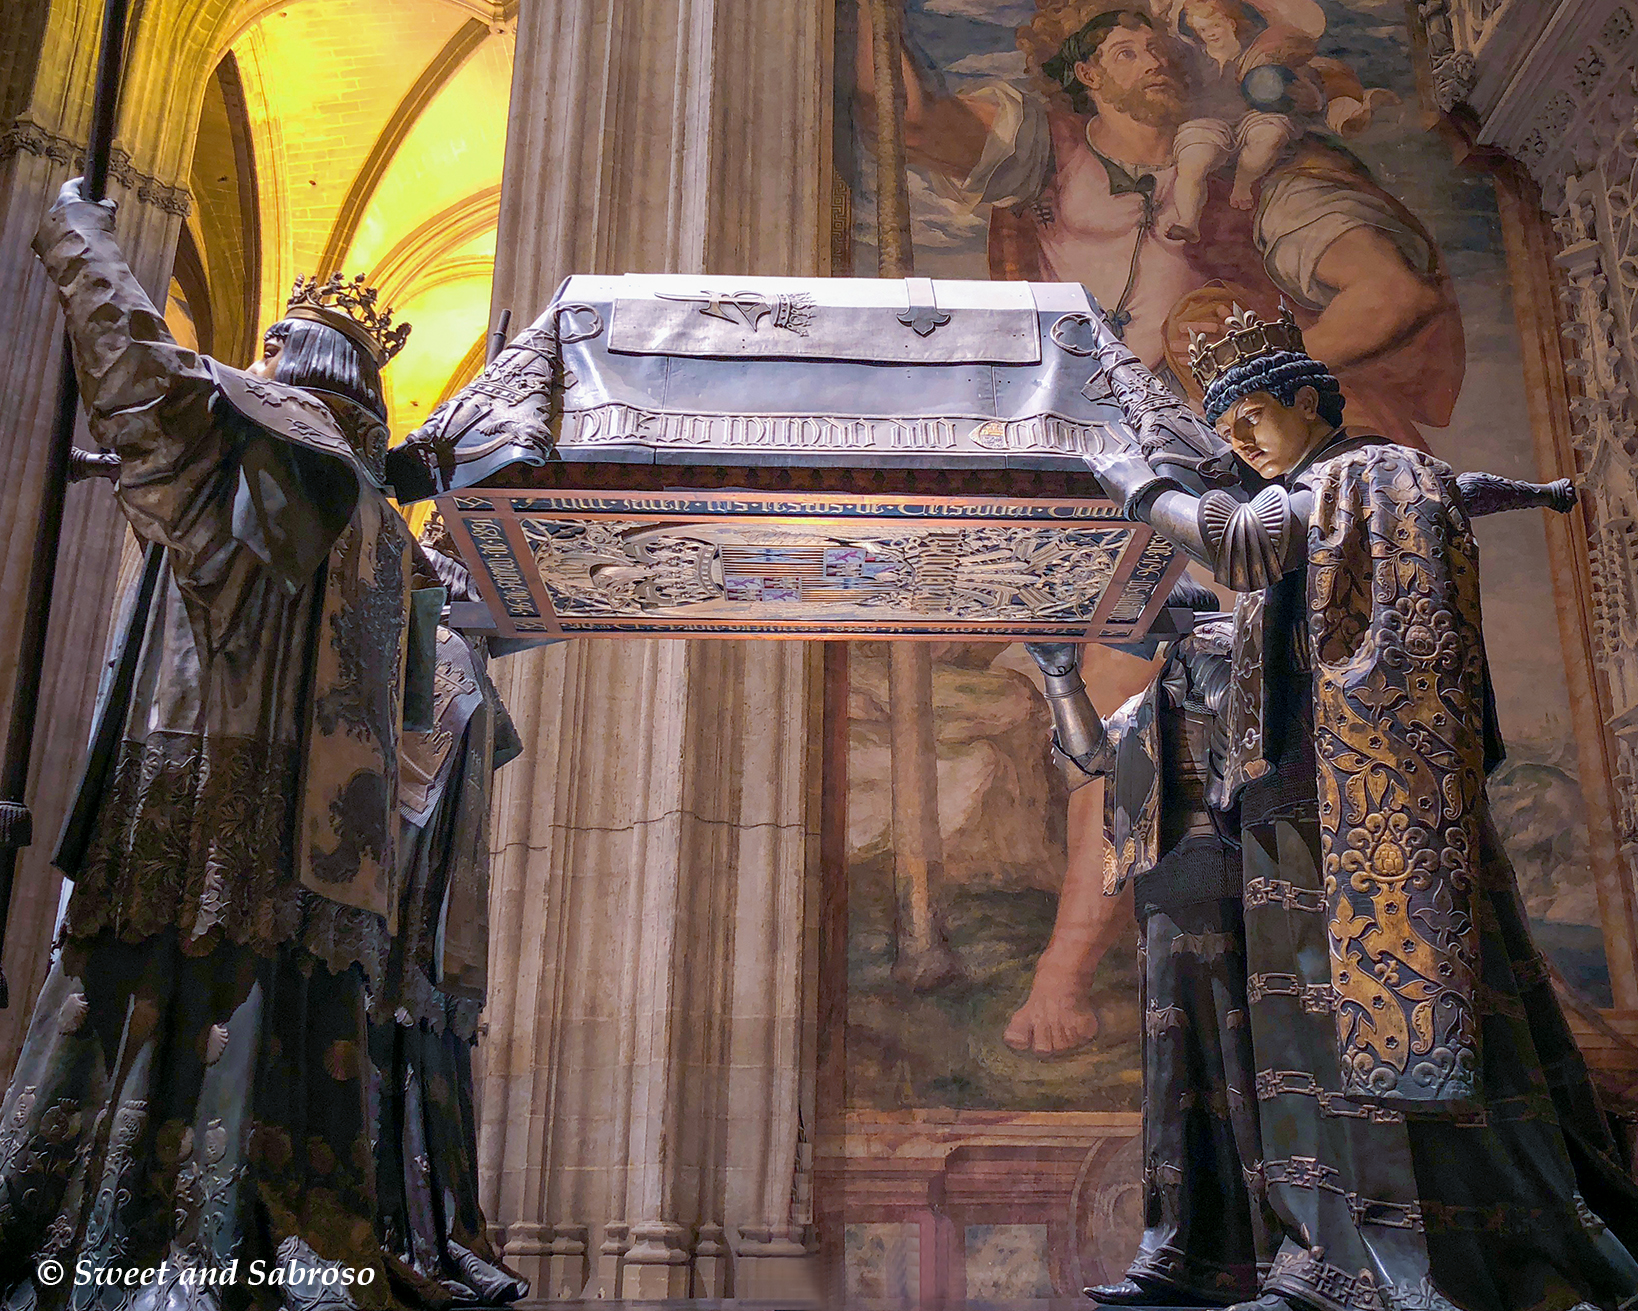 Tomb of Christopher Columbus held by four figures representing the kingdoms of Spain